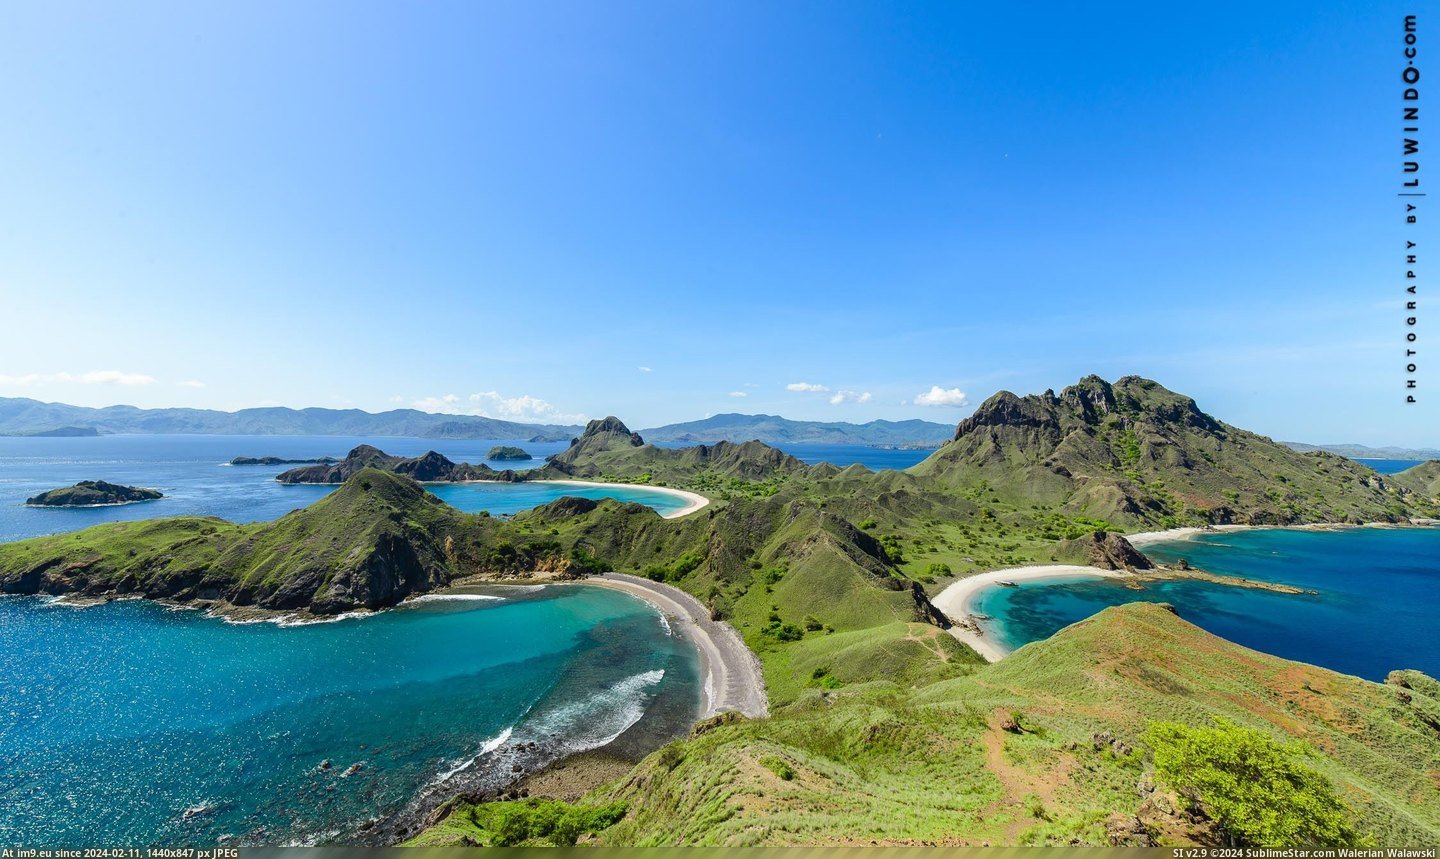 #Top #Island #Flores #Mountain #Indonesia [Earthporn] Padar Island, Flores, Indonesia - Mountain top view [2248x1334] Pic. (Image of album My r/EARTHPORN favs))